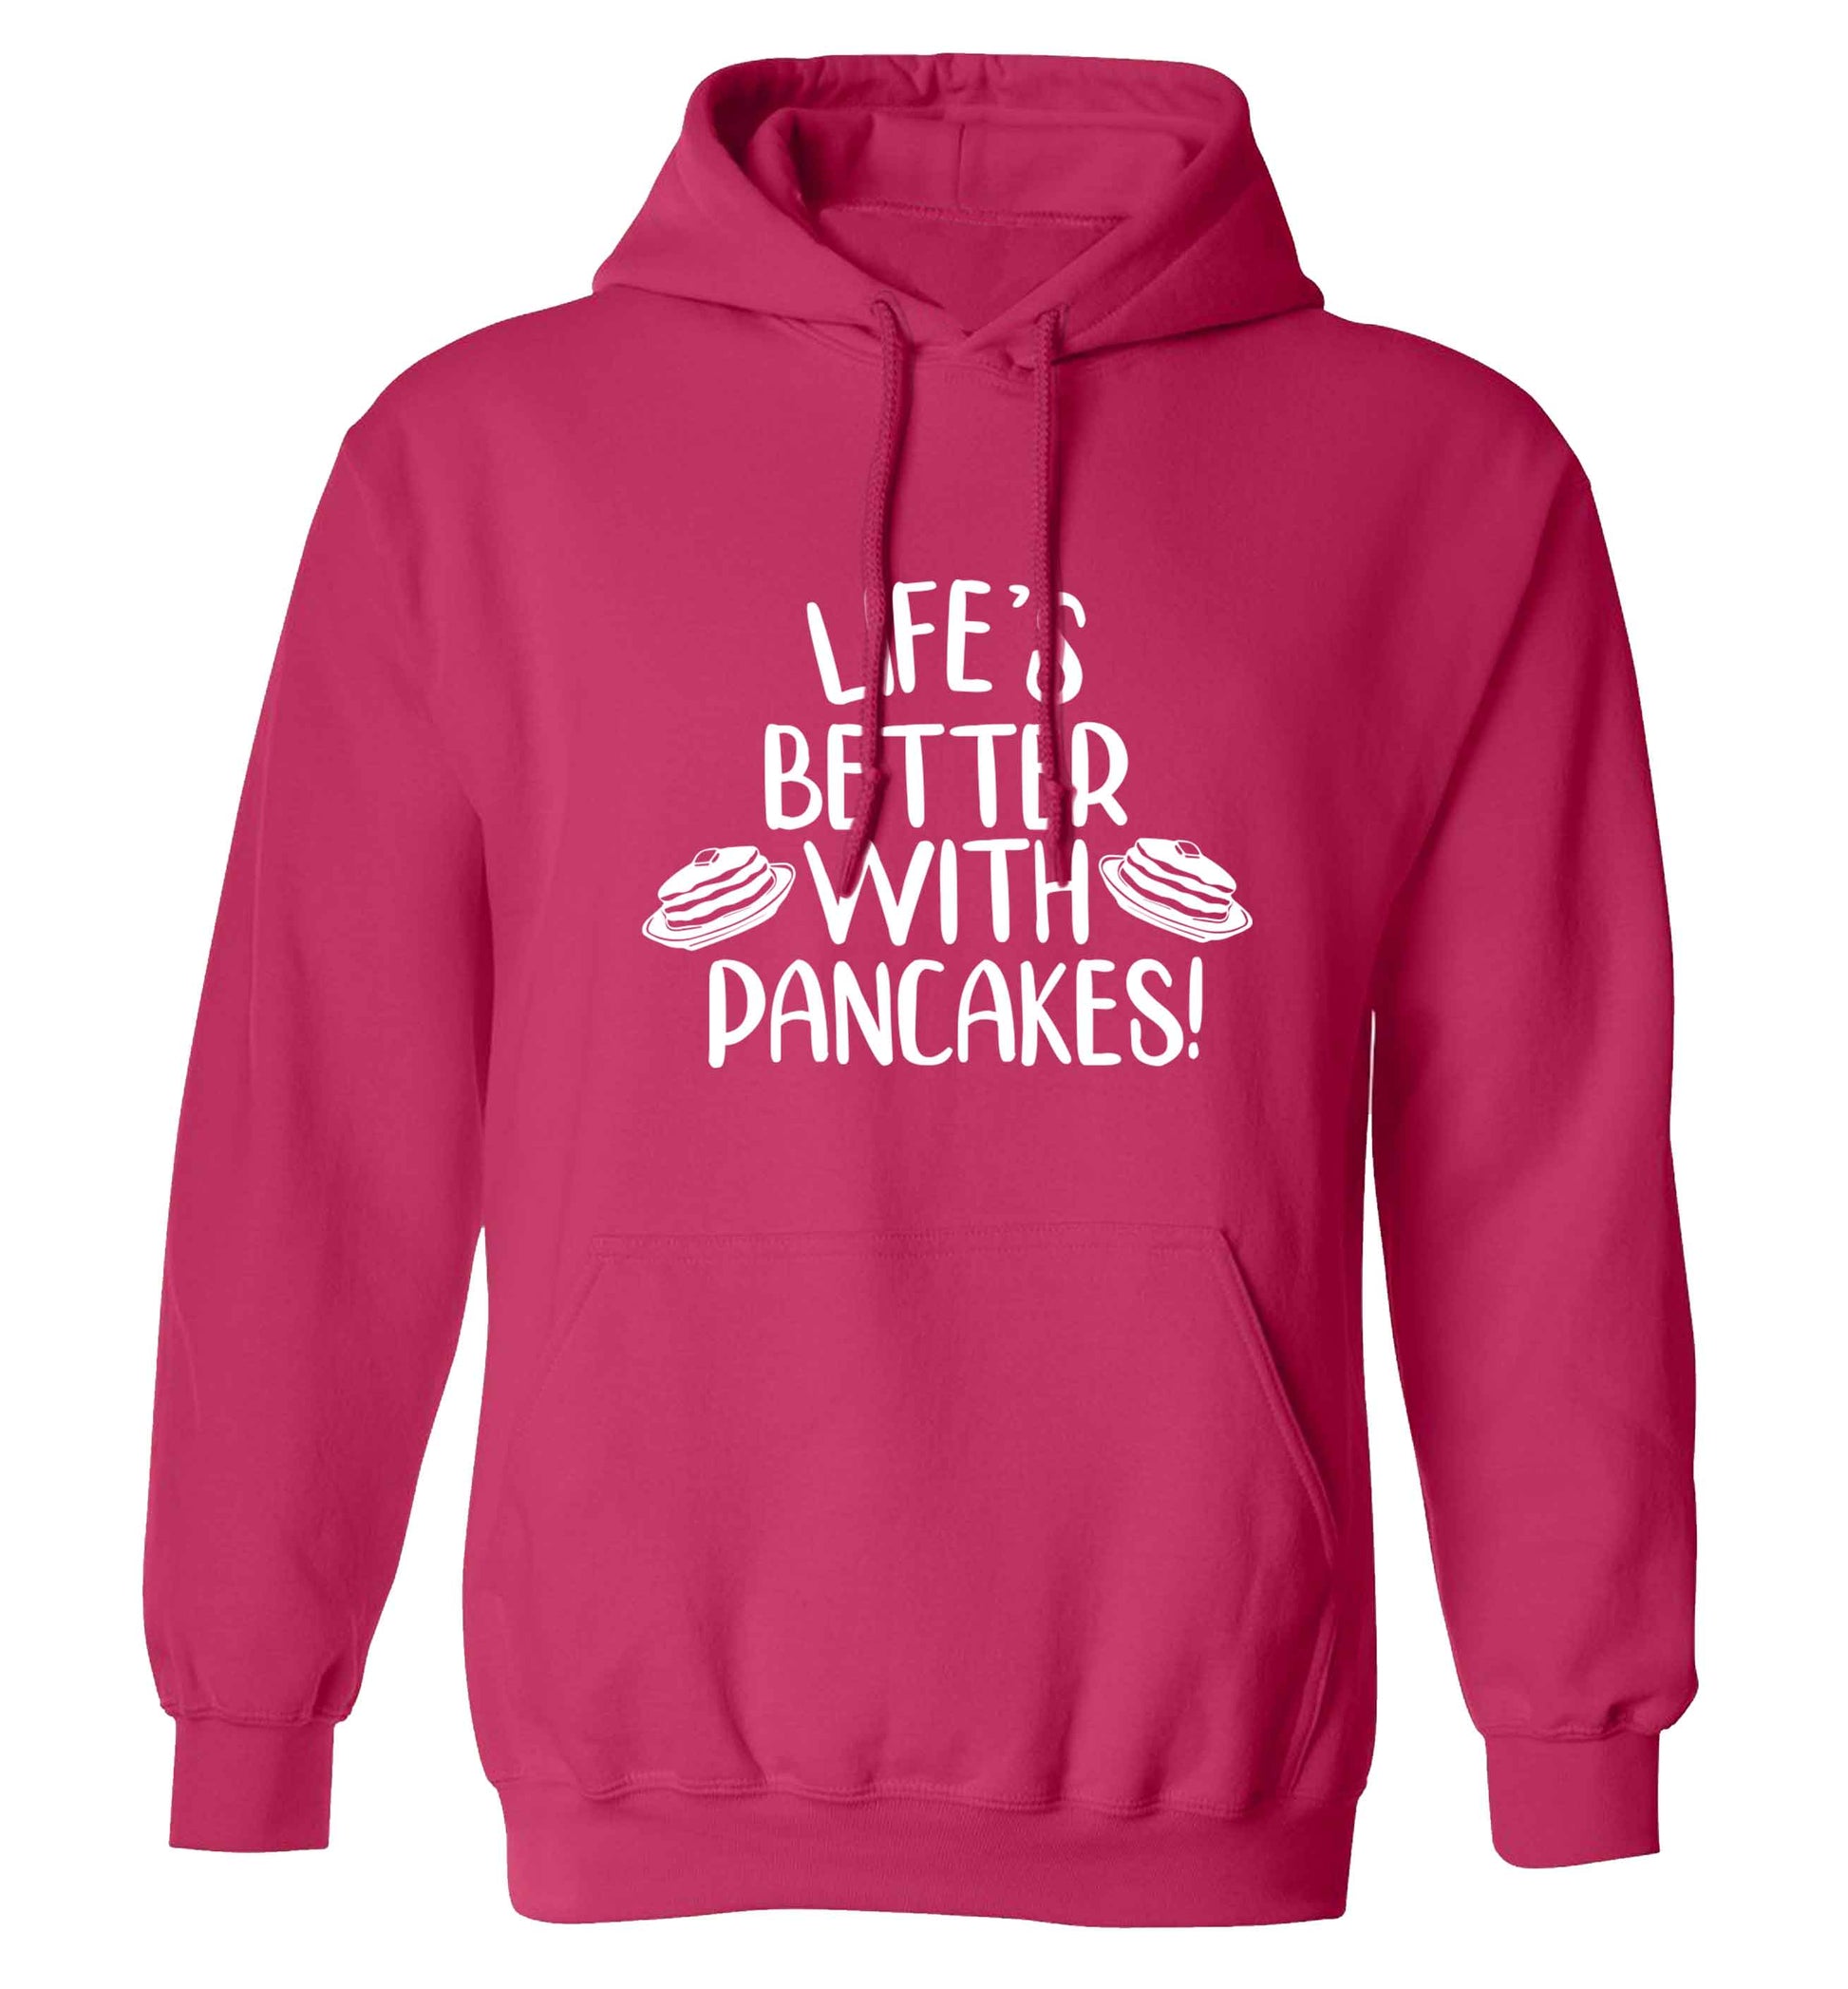 Life's better with pancakes adults unisex pink hoodie 2XL